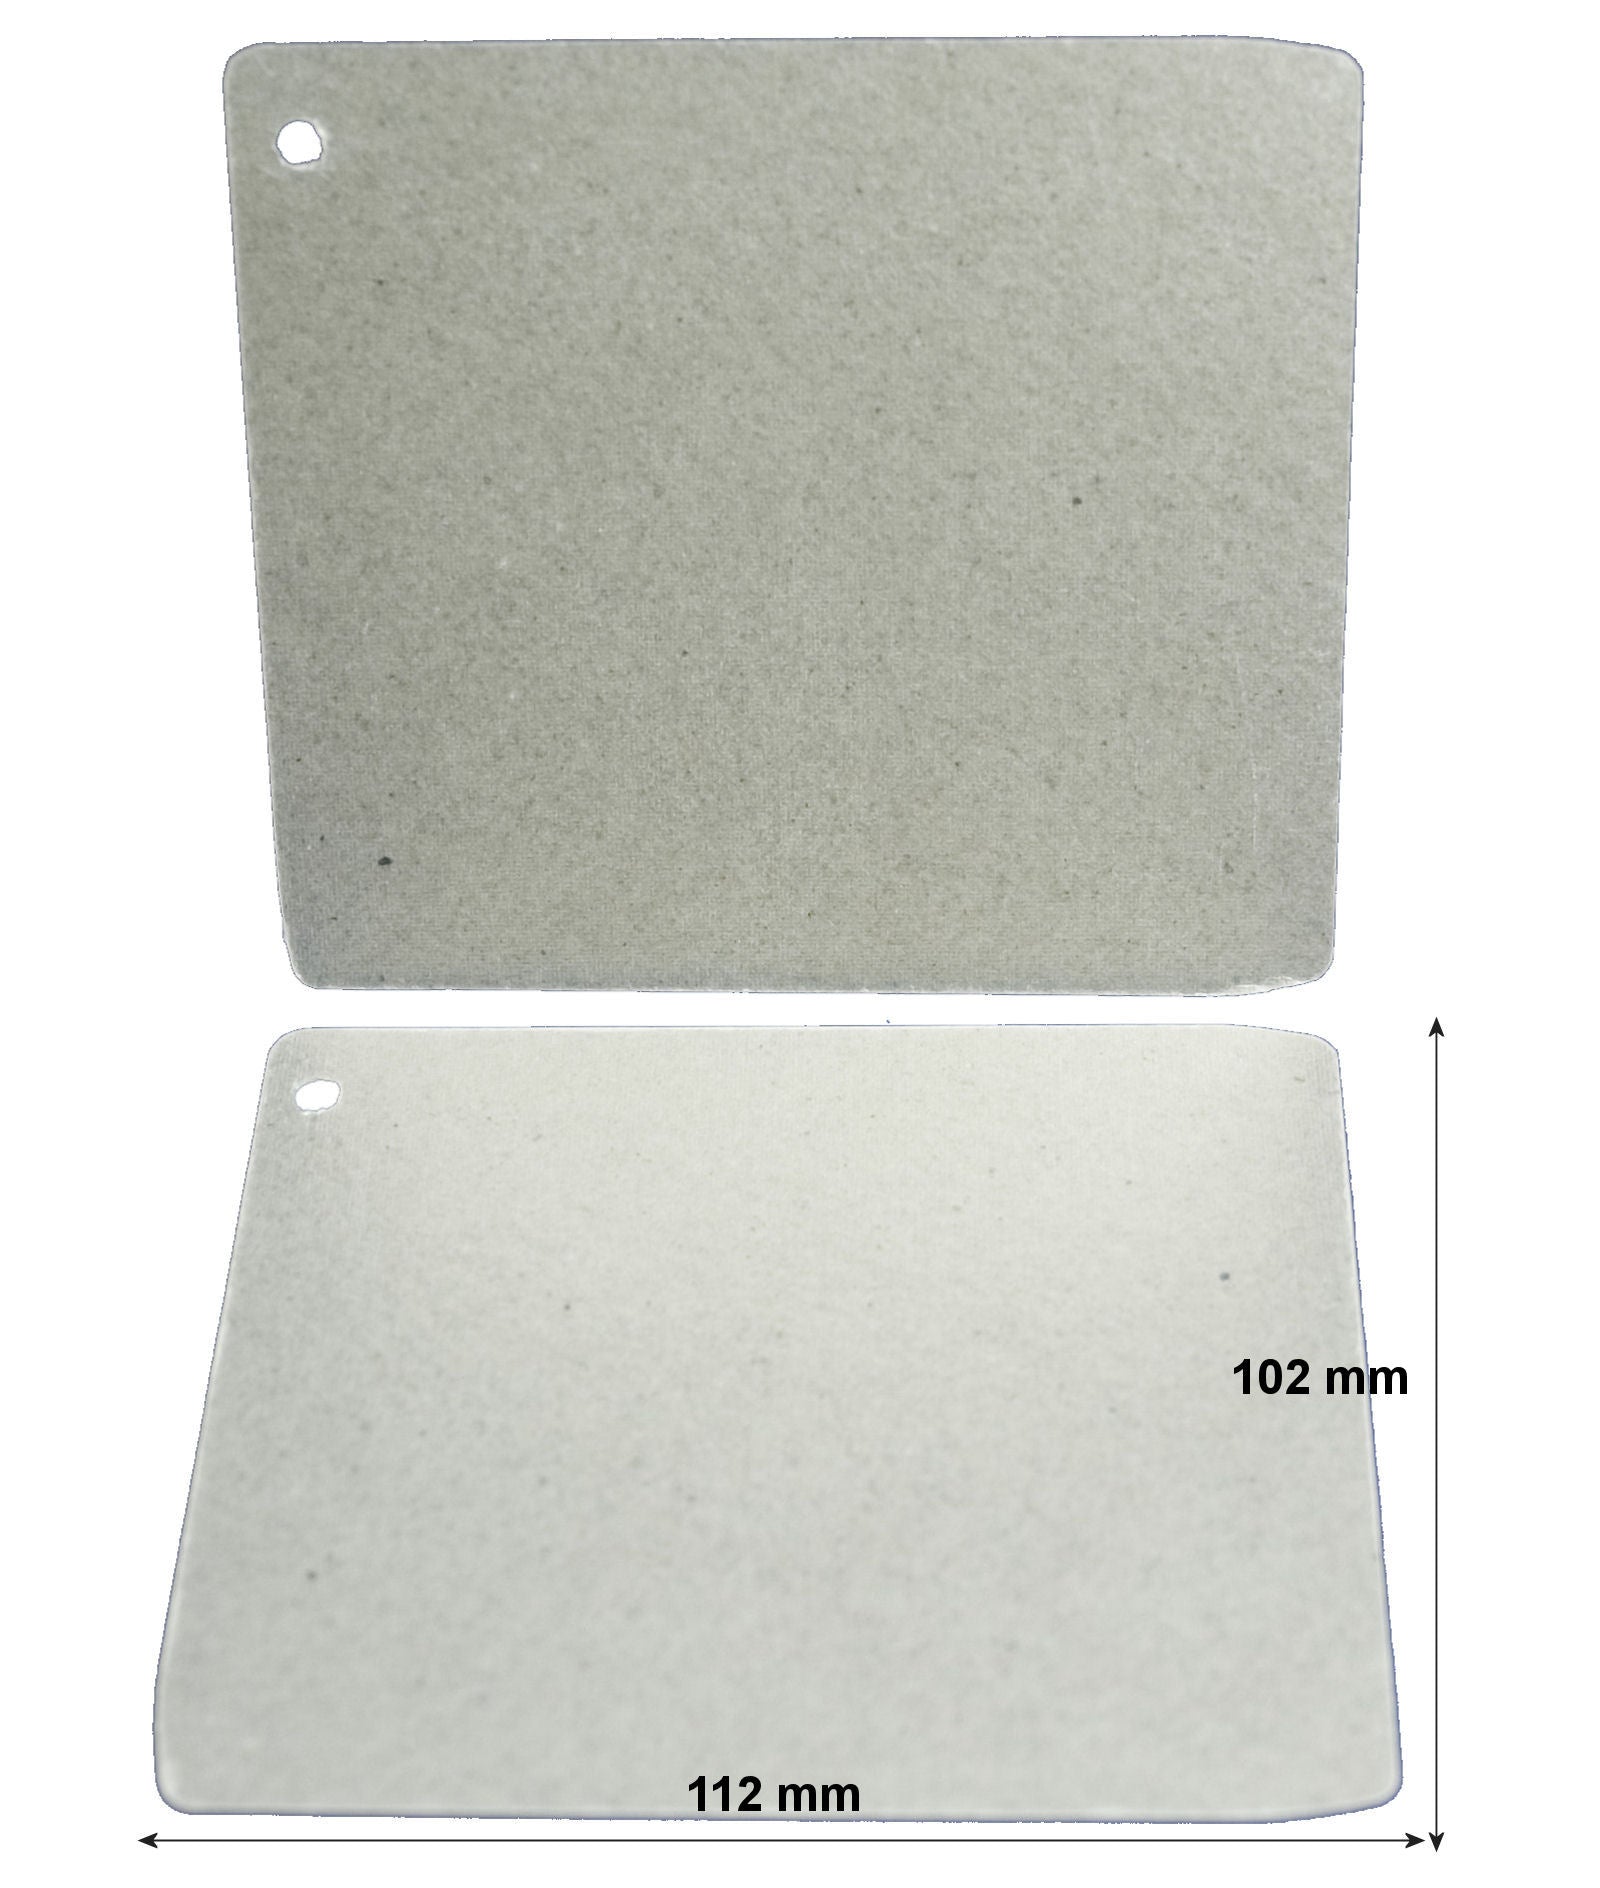 Pack of two waveguide covers for Panasonic microwave ovens.